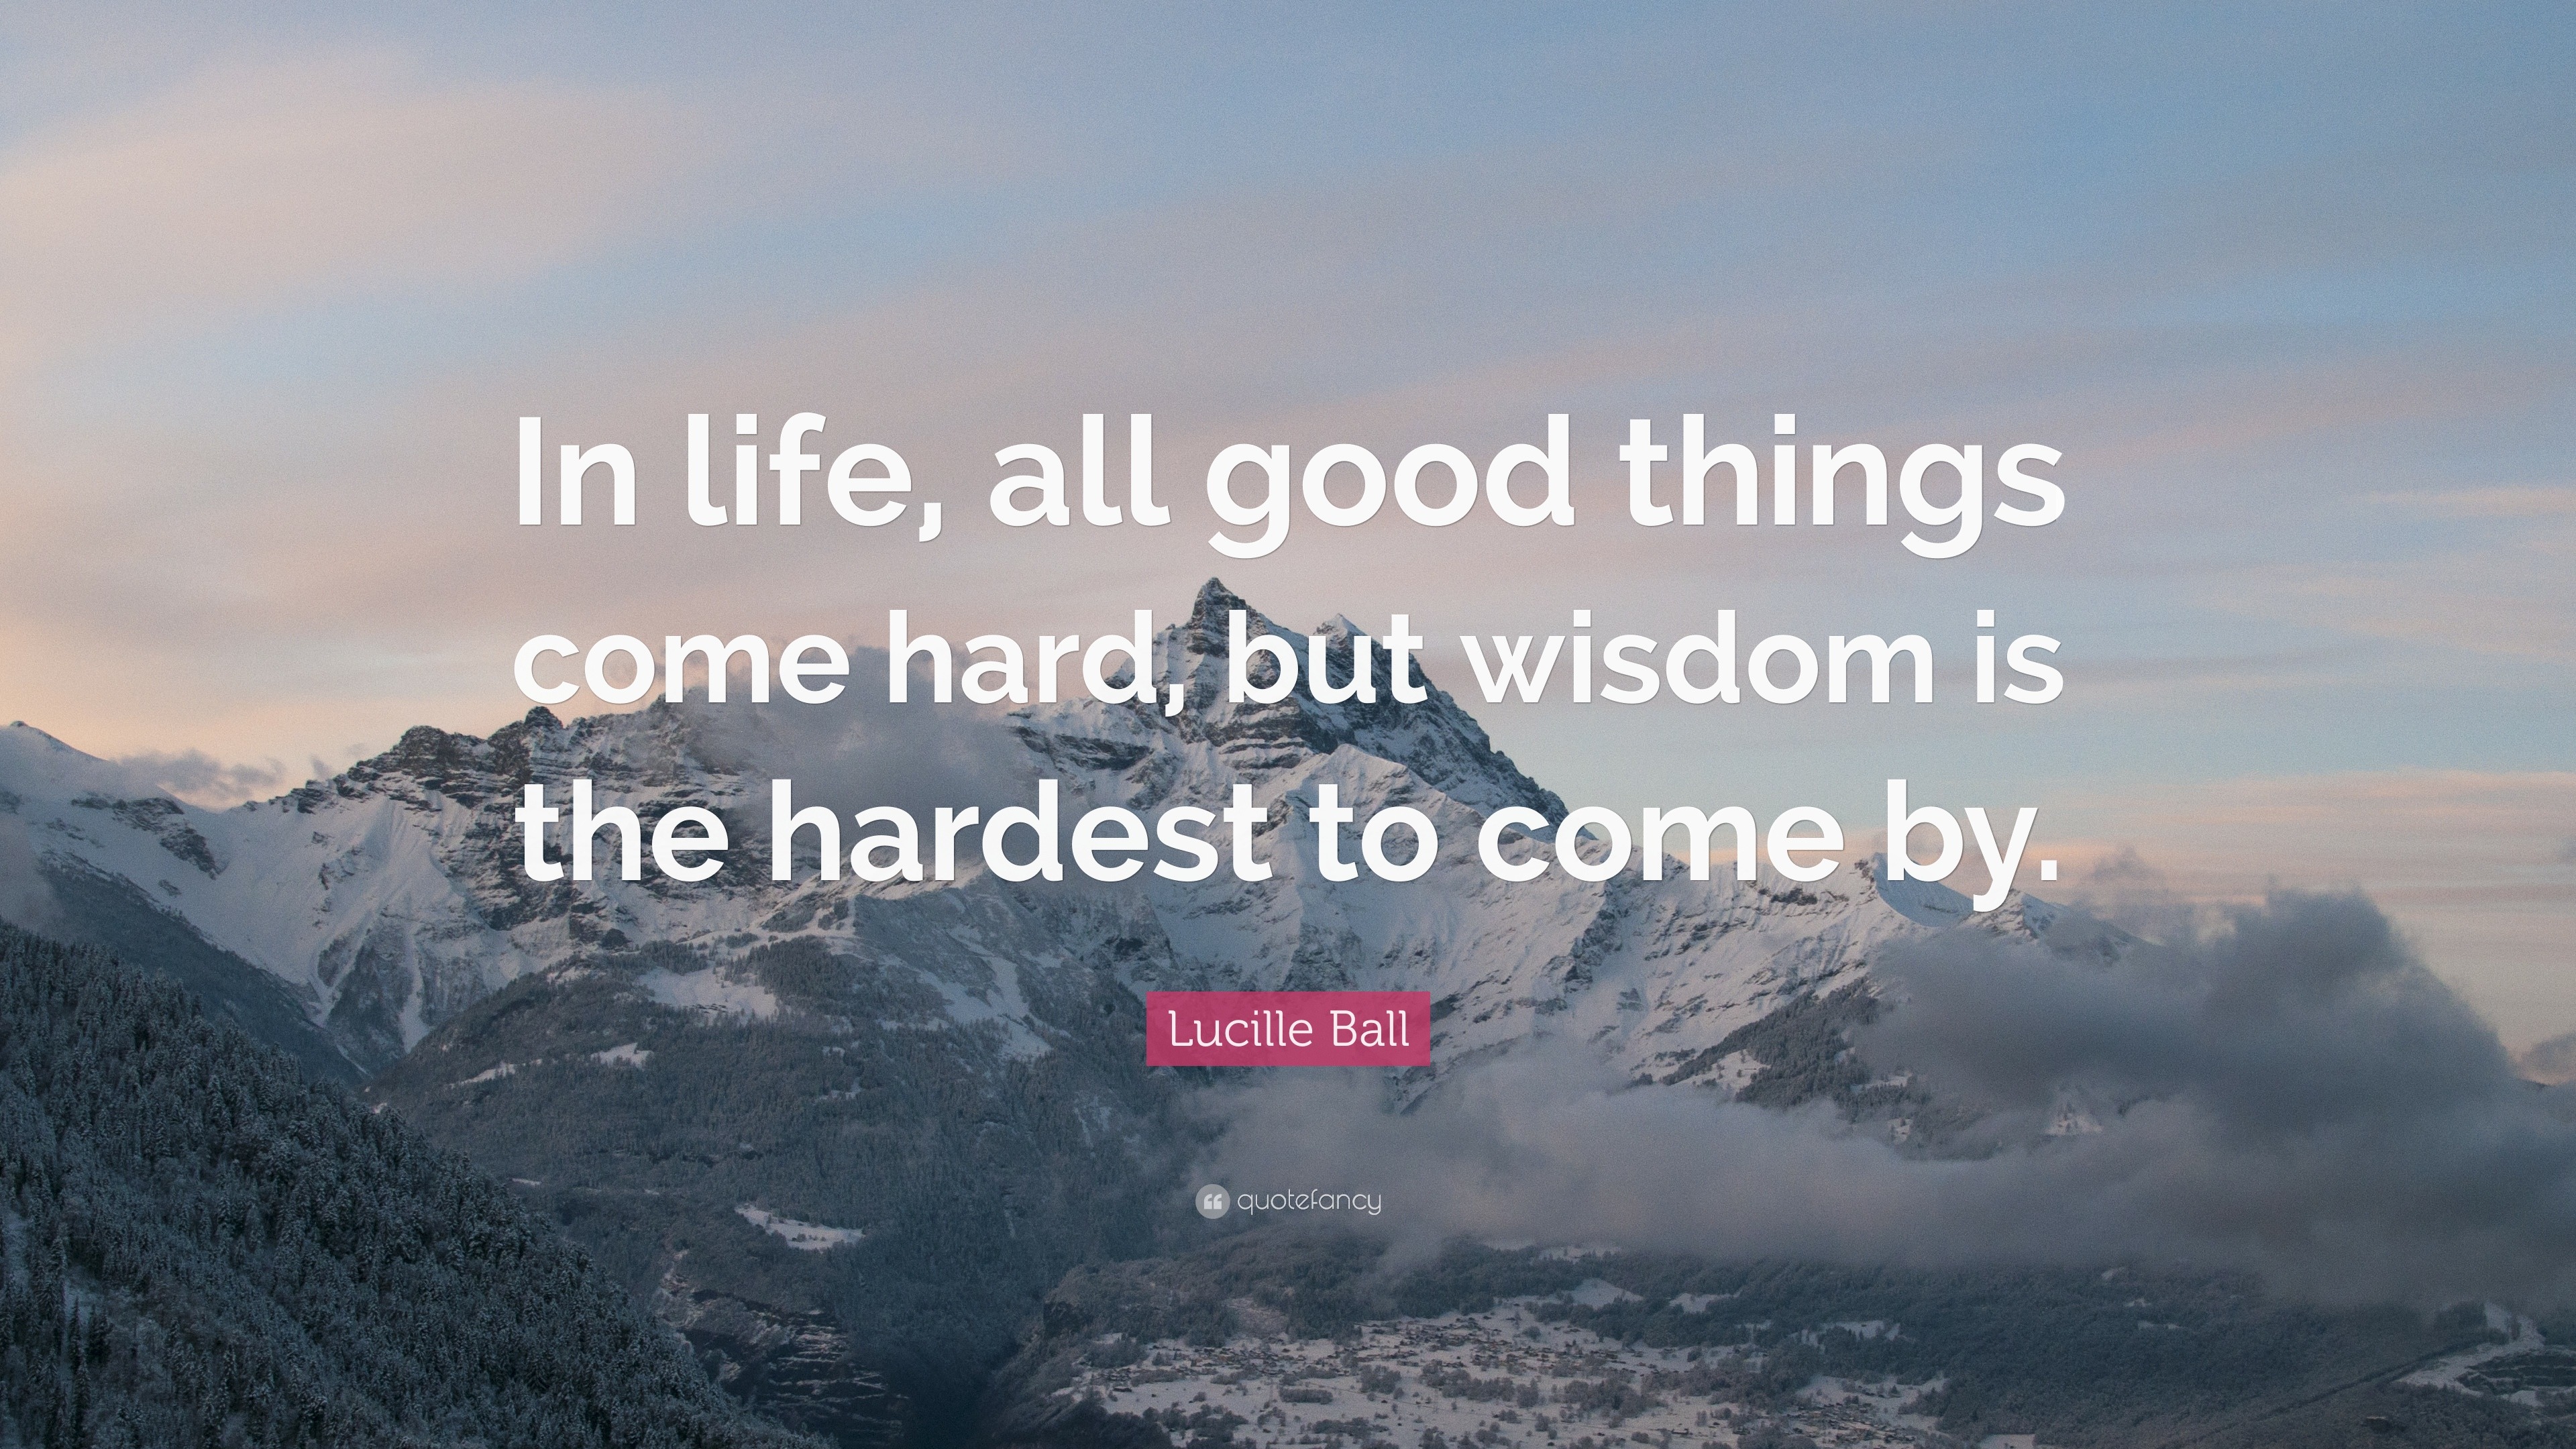 Lucille Ball Quote “In life all good things e hard but wisdom